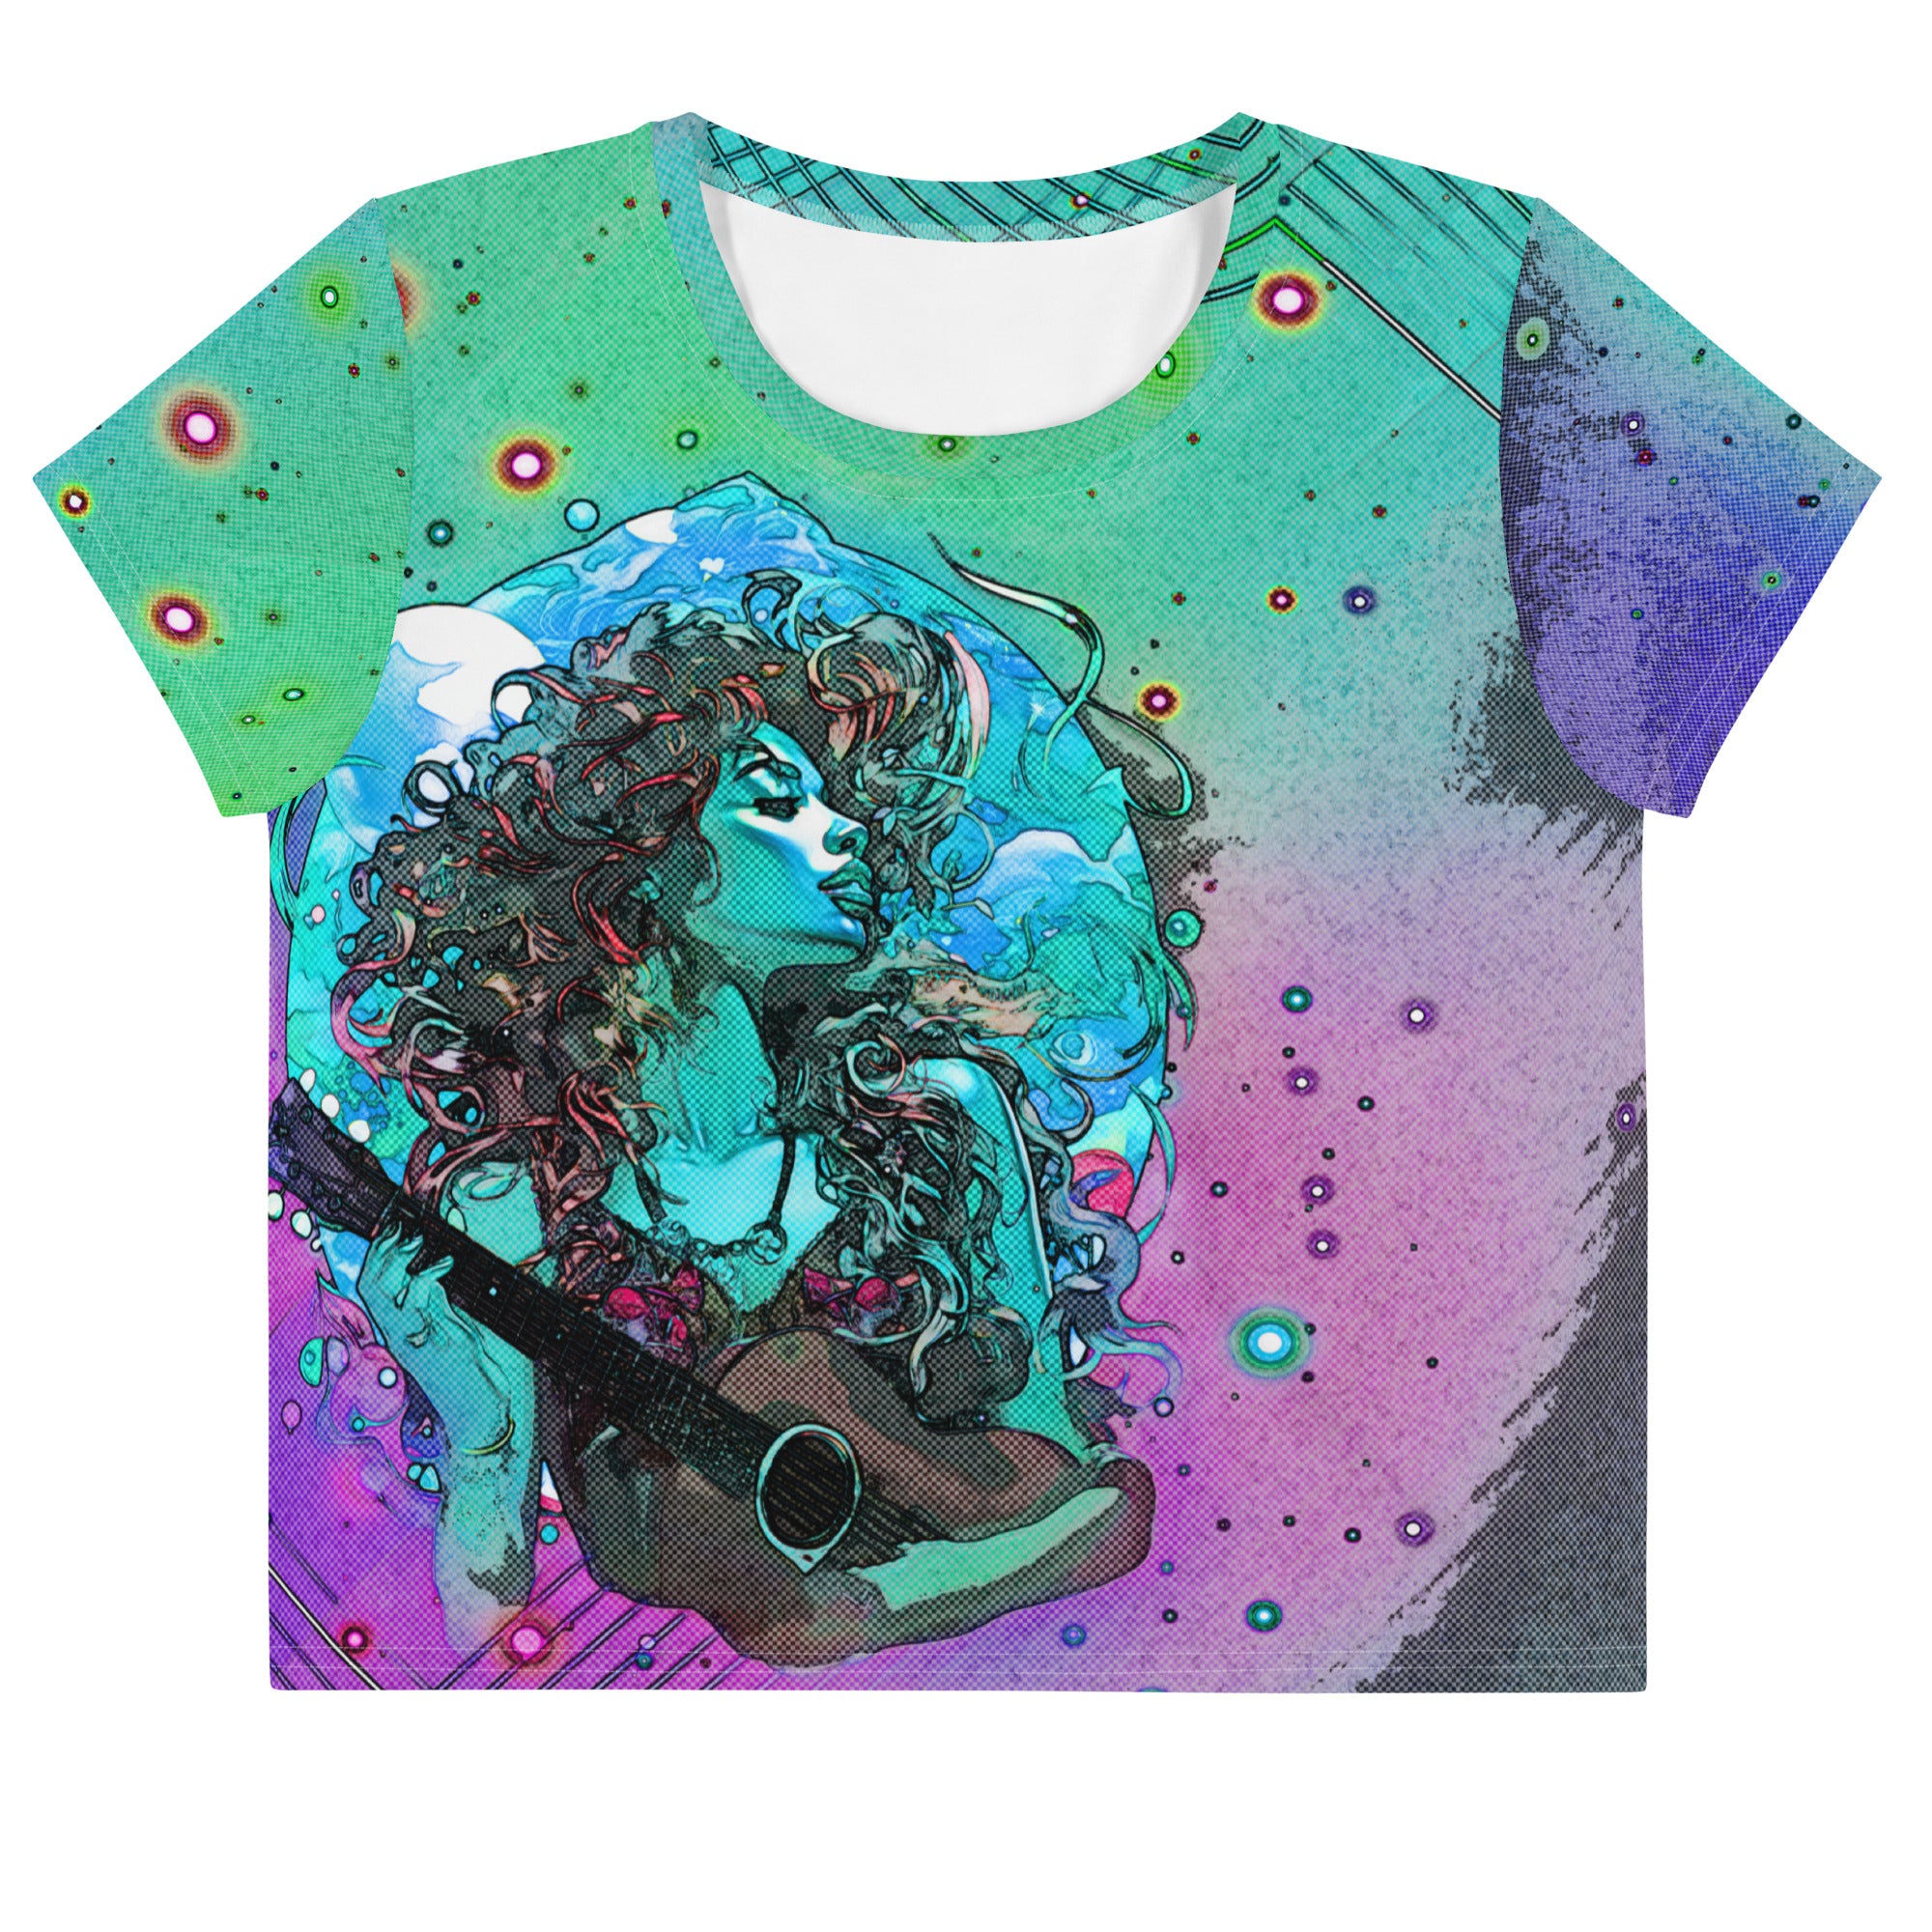 Twilight Tunes Tapestry All-Over Print Crop Tee